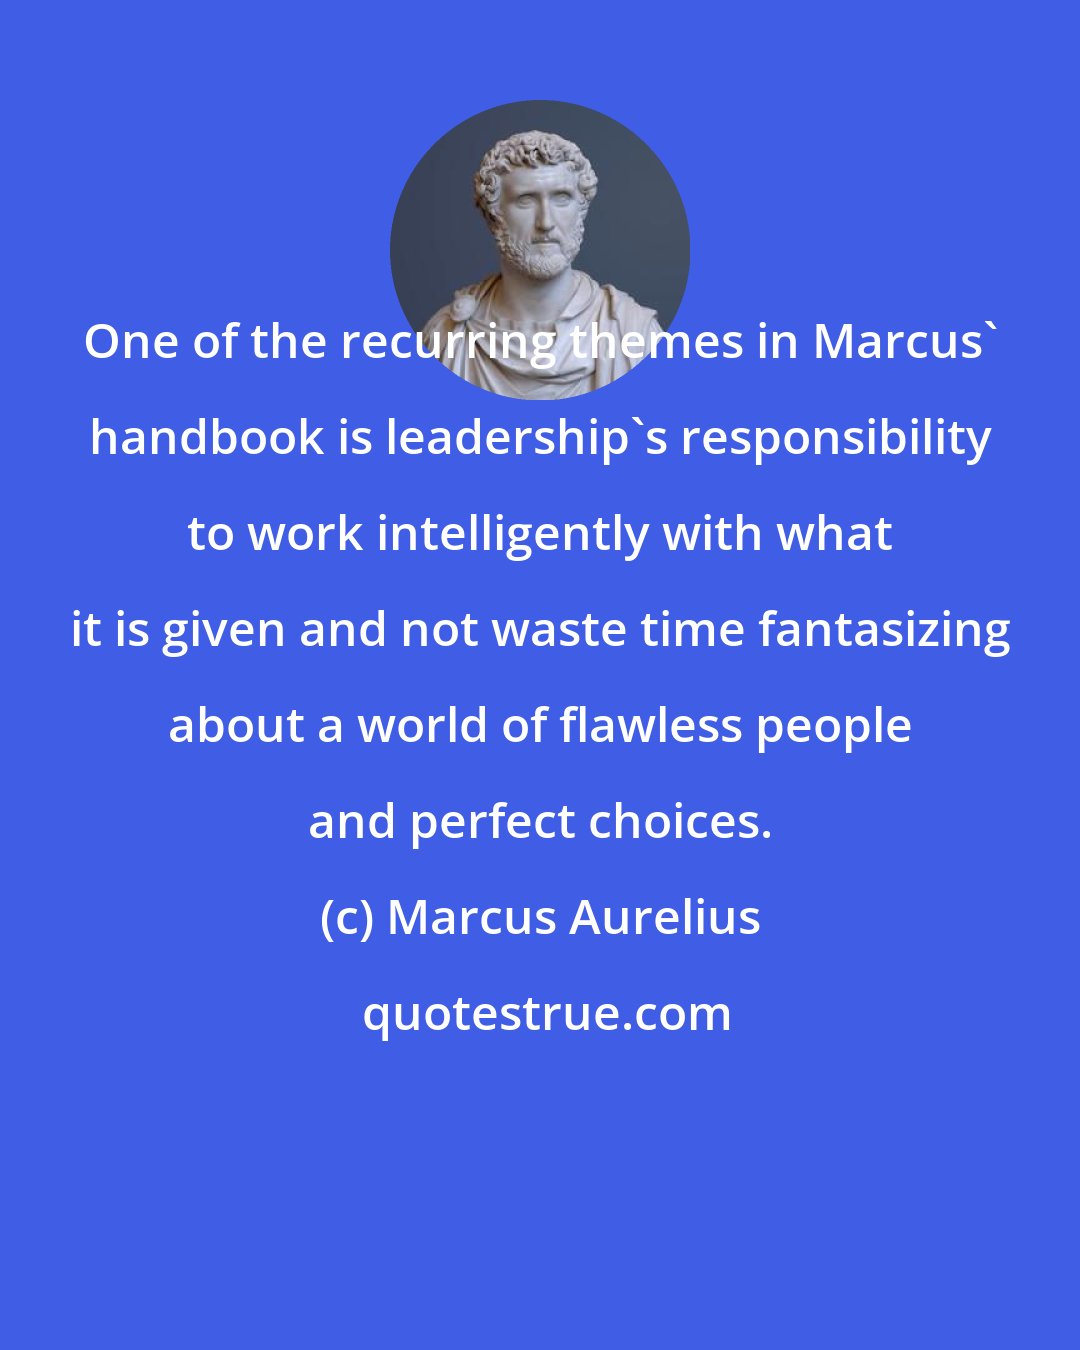 Marcus Aurelius: One of the recurring themes in Marcus' handbook is leadership's responsibility to work intelligently with what it is given and not waste time fantasizing about a world of flawless people and perfect choices.